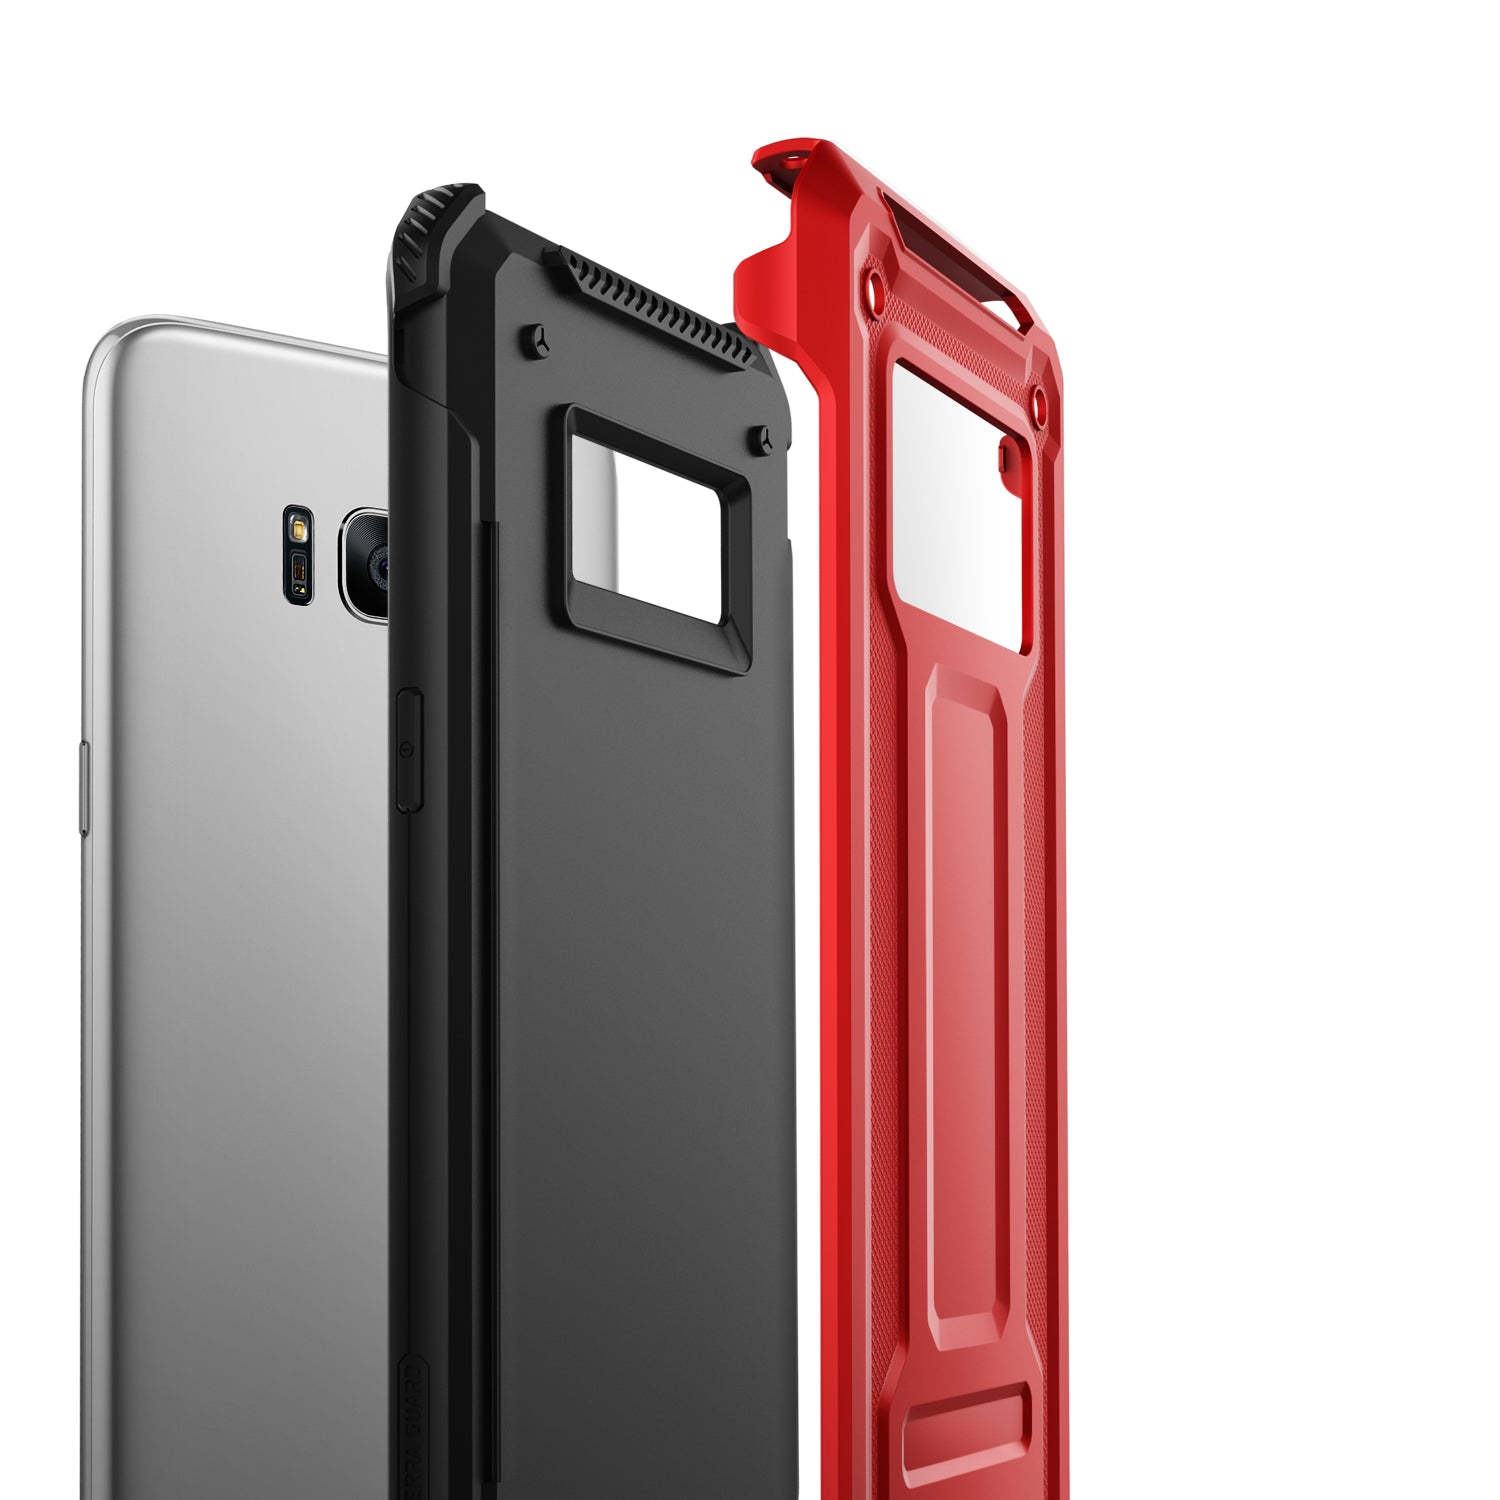 Terra Guard Series For Galaxy S8 Plus Anti Shocks Tough Rugged Case Original From VRS Red